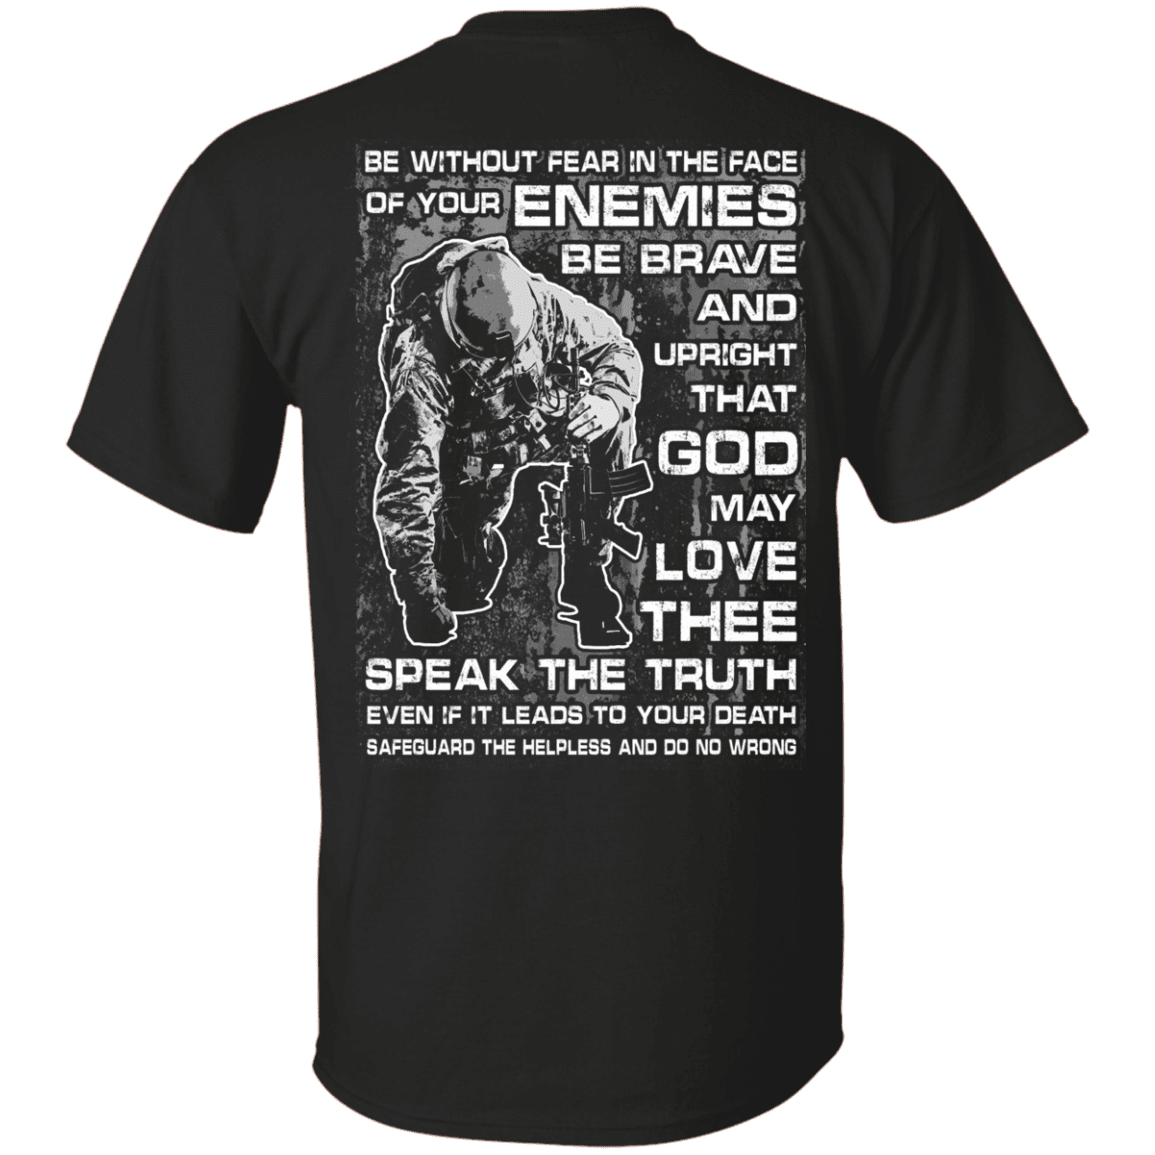 Military T-Shirt "Be without Fear in The Face" Men Back-TShirt-General-Veterans Nation